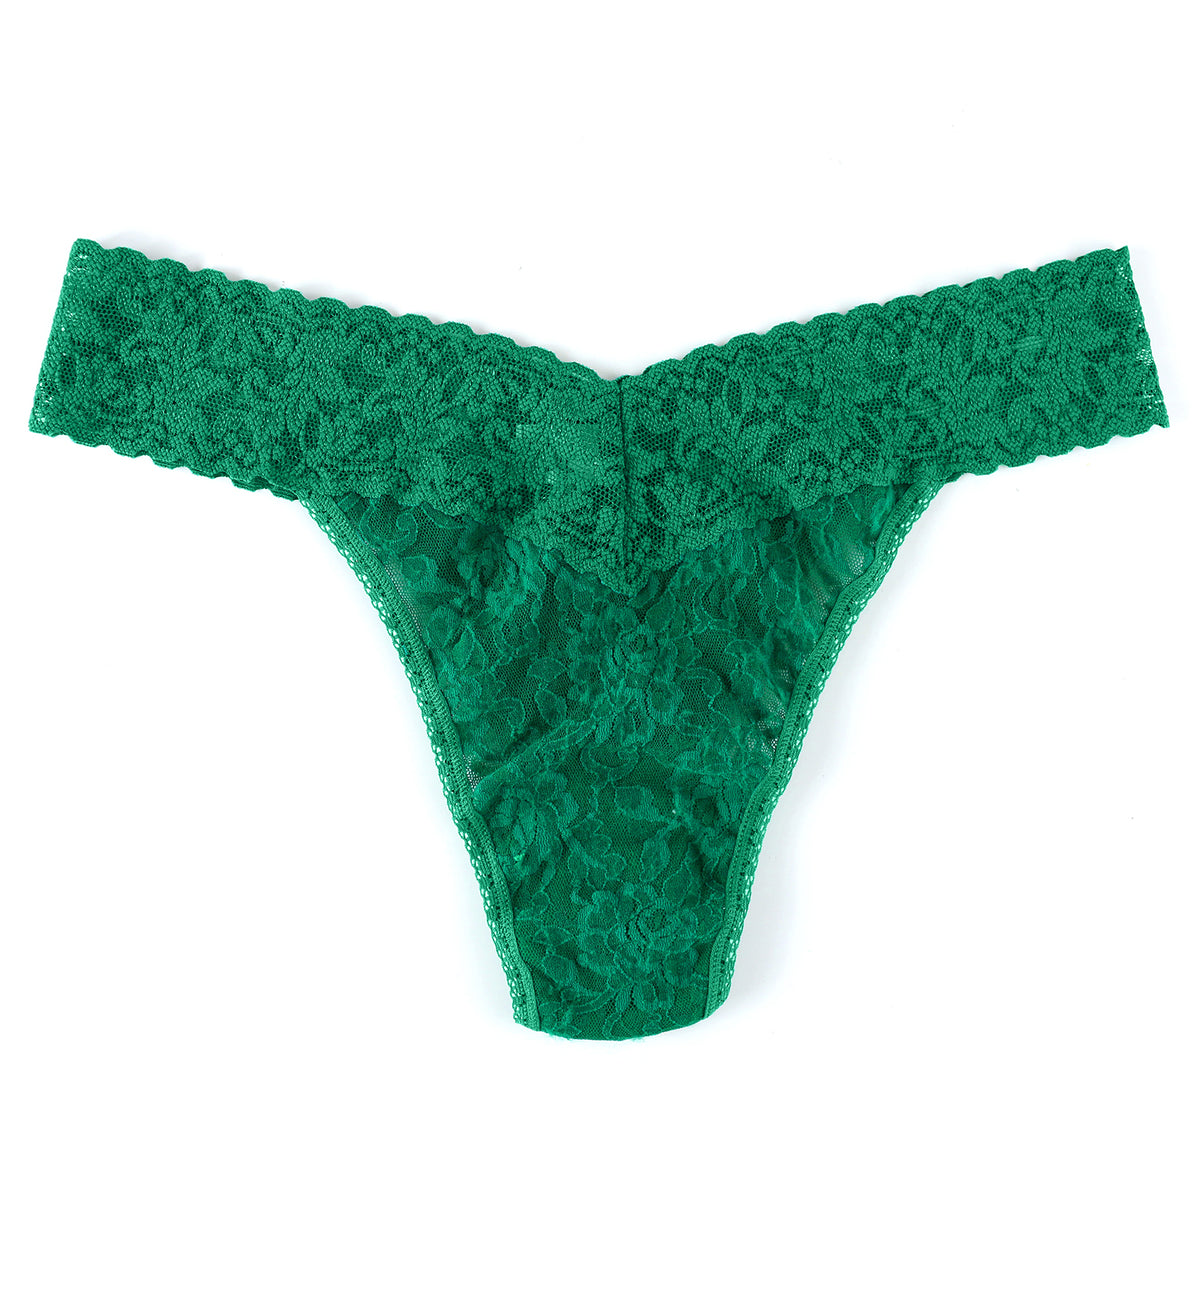 Hanky Panky Signature Lace Original Rise Thong (4811P),Green Envy - Green Envy,One Size